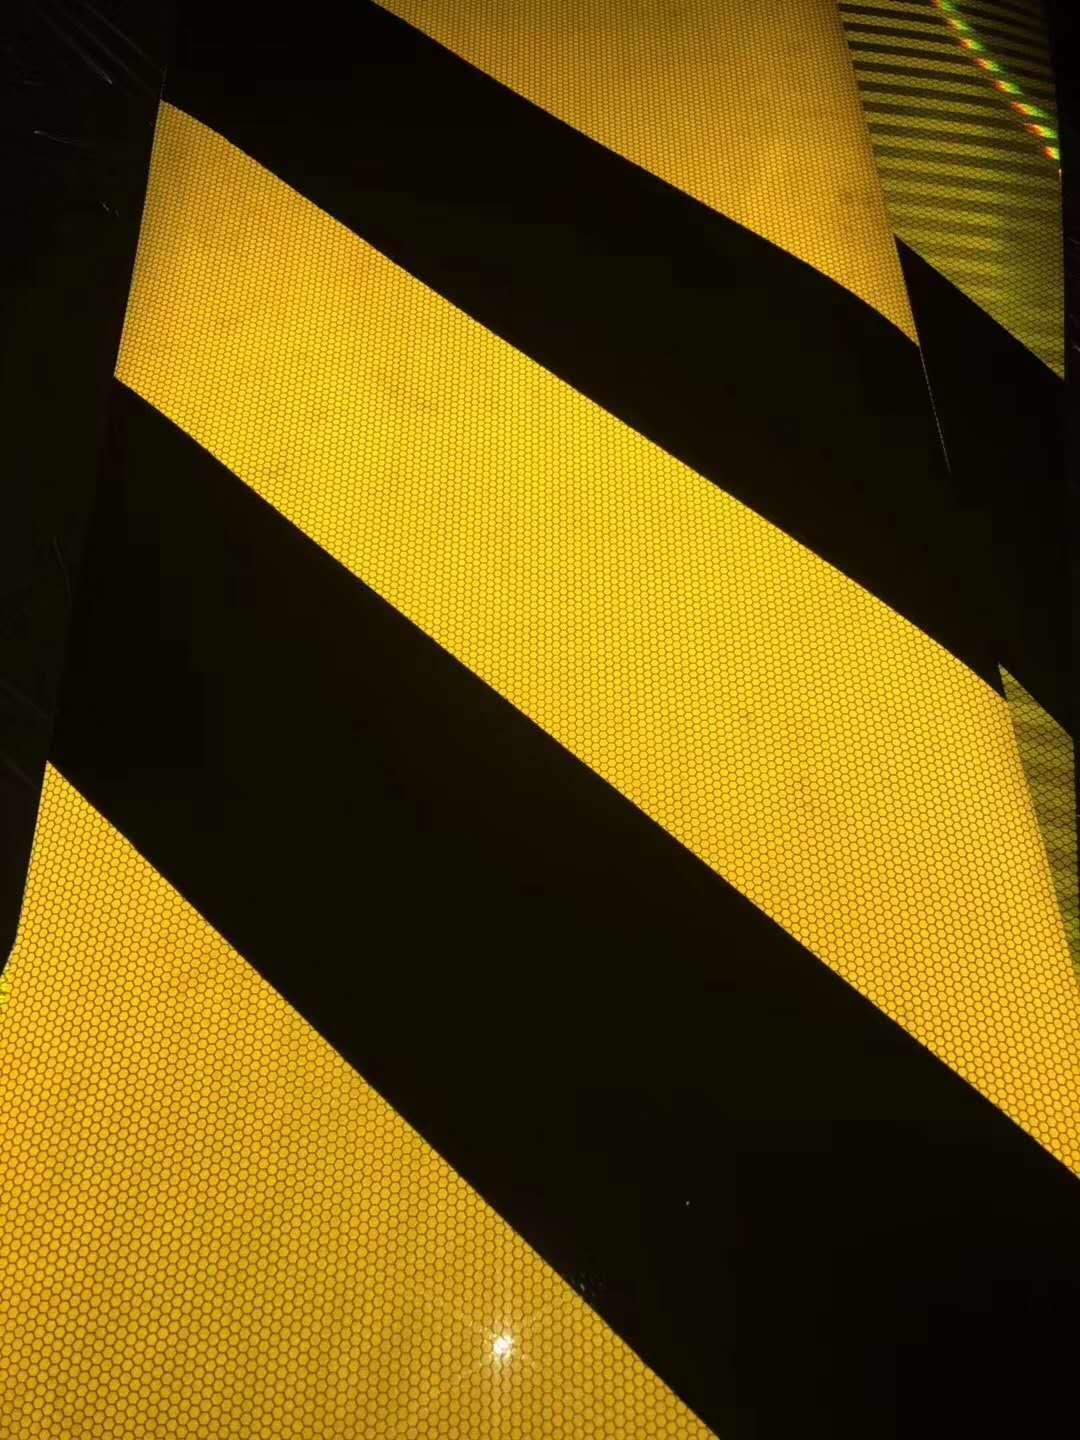  Highway Reflective Reflective Safety Tape , Striped Chevron Hi Vis Reflective Bumper Tape Manufactures